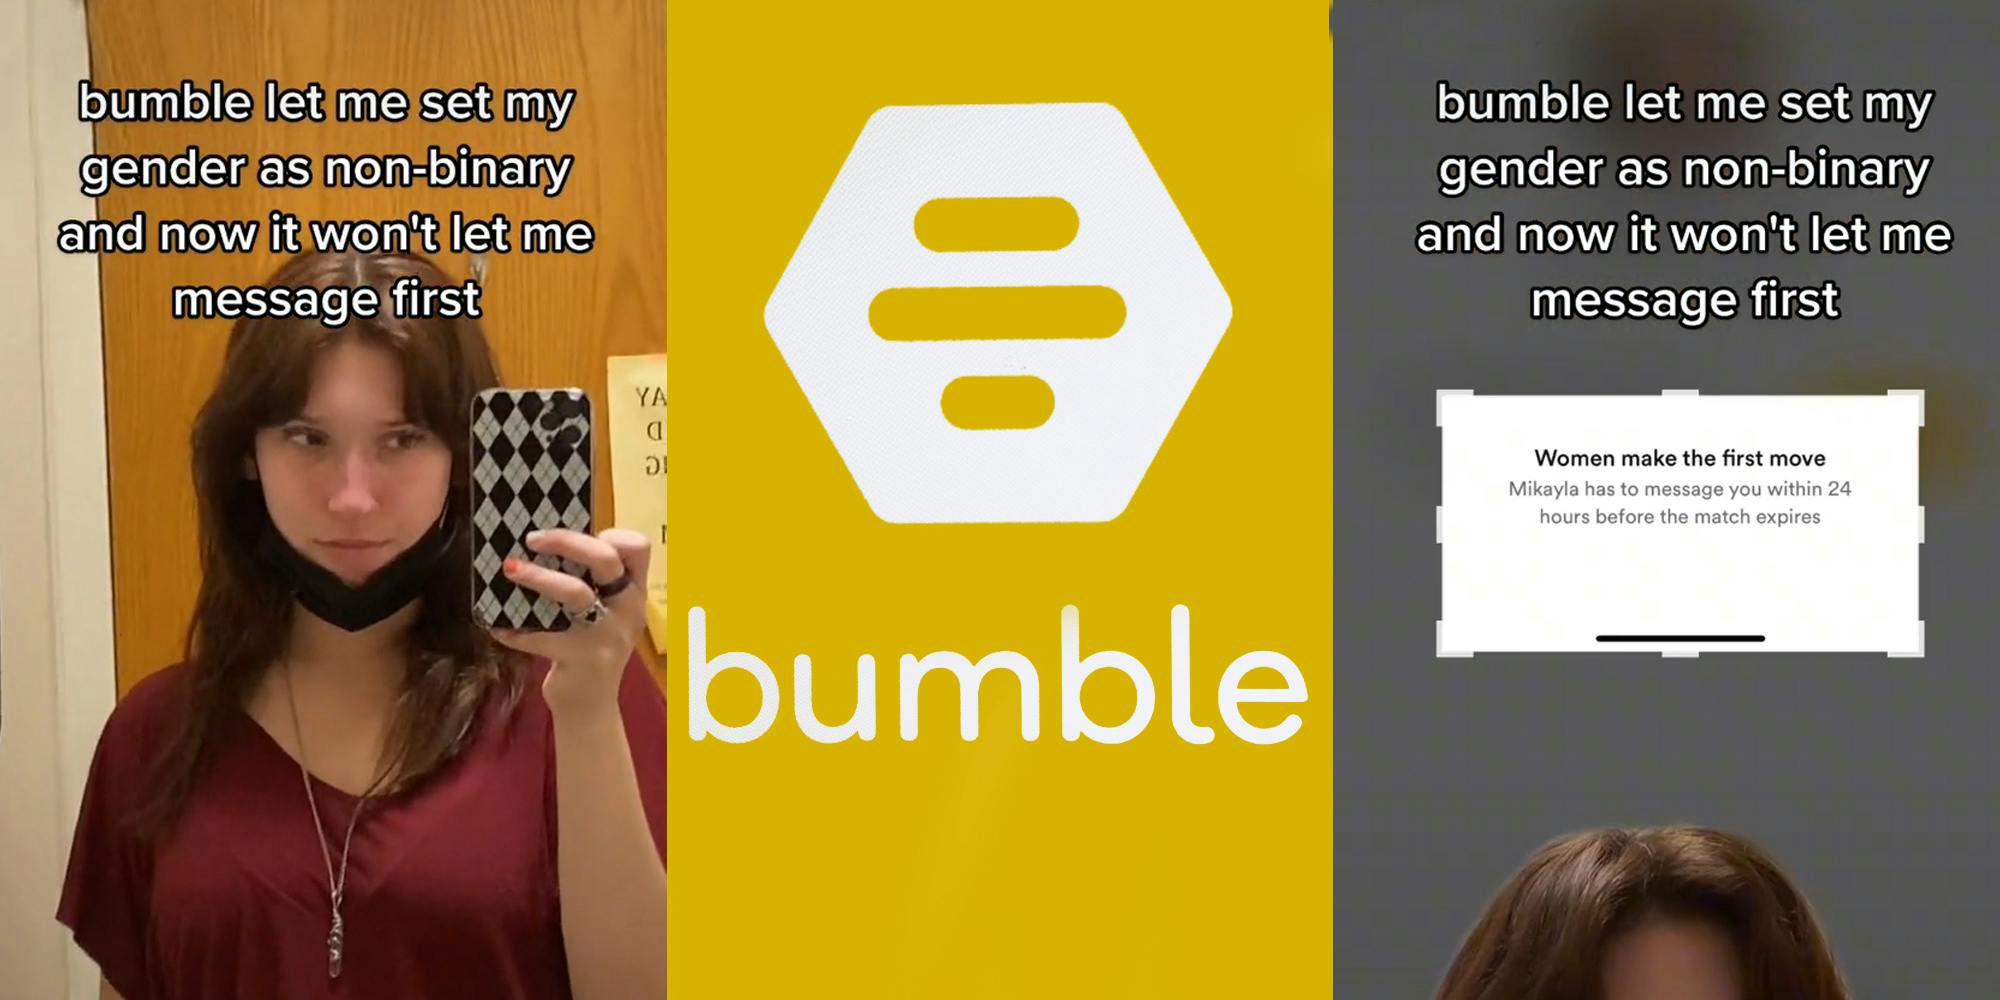 woman posing in mirror caption "bumble let me set my gender as non-binary and now it won't let me message first" (l) bumble logo on yellow background (c) woman greenscreen tiktok over bumble screen "women make the first move Mikayla has to message you within 24 hours before match expires" caption "bumble let me set my gender as non-binary and now it won't let me message first" (r)